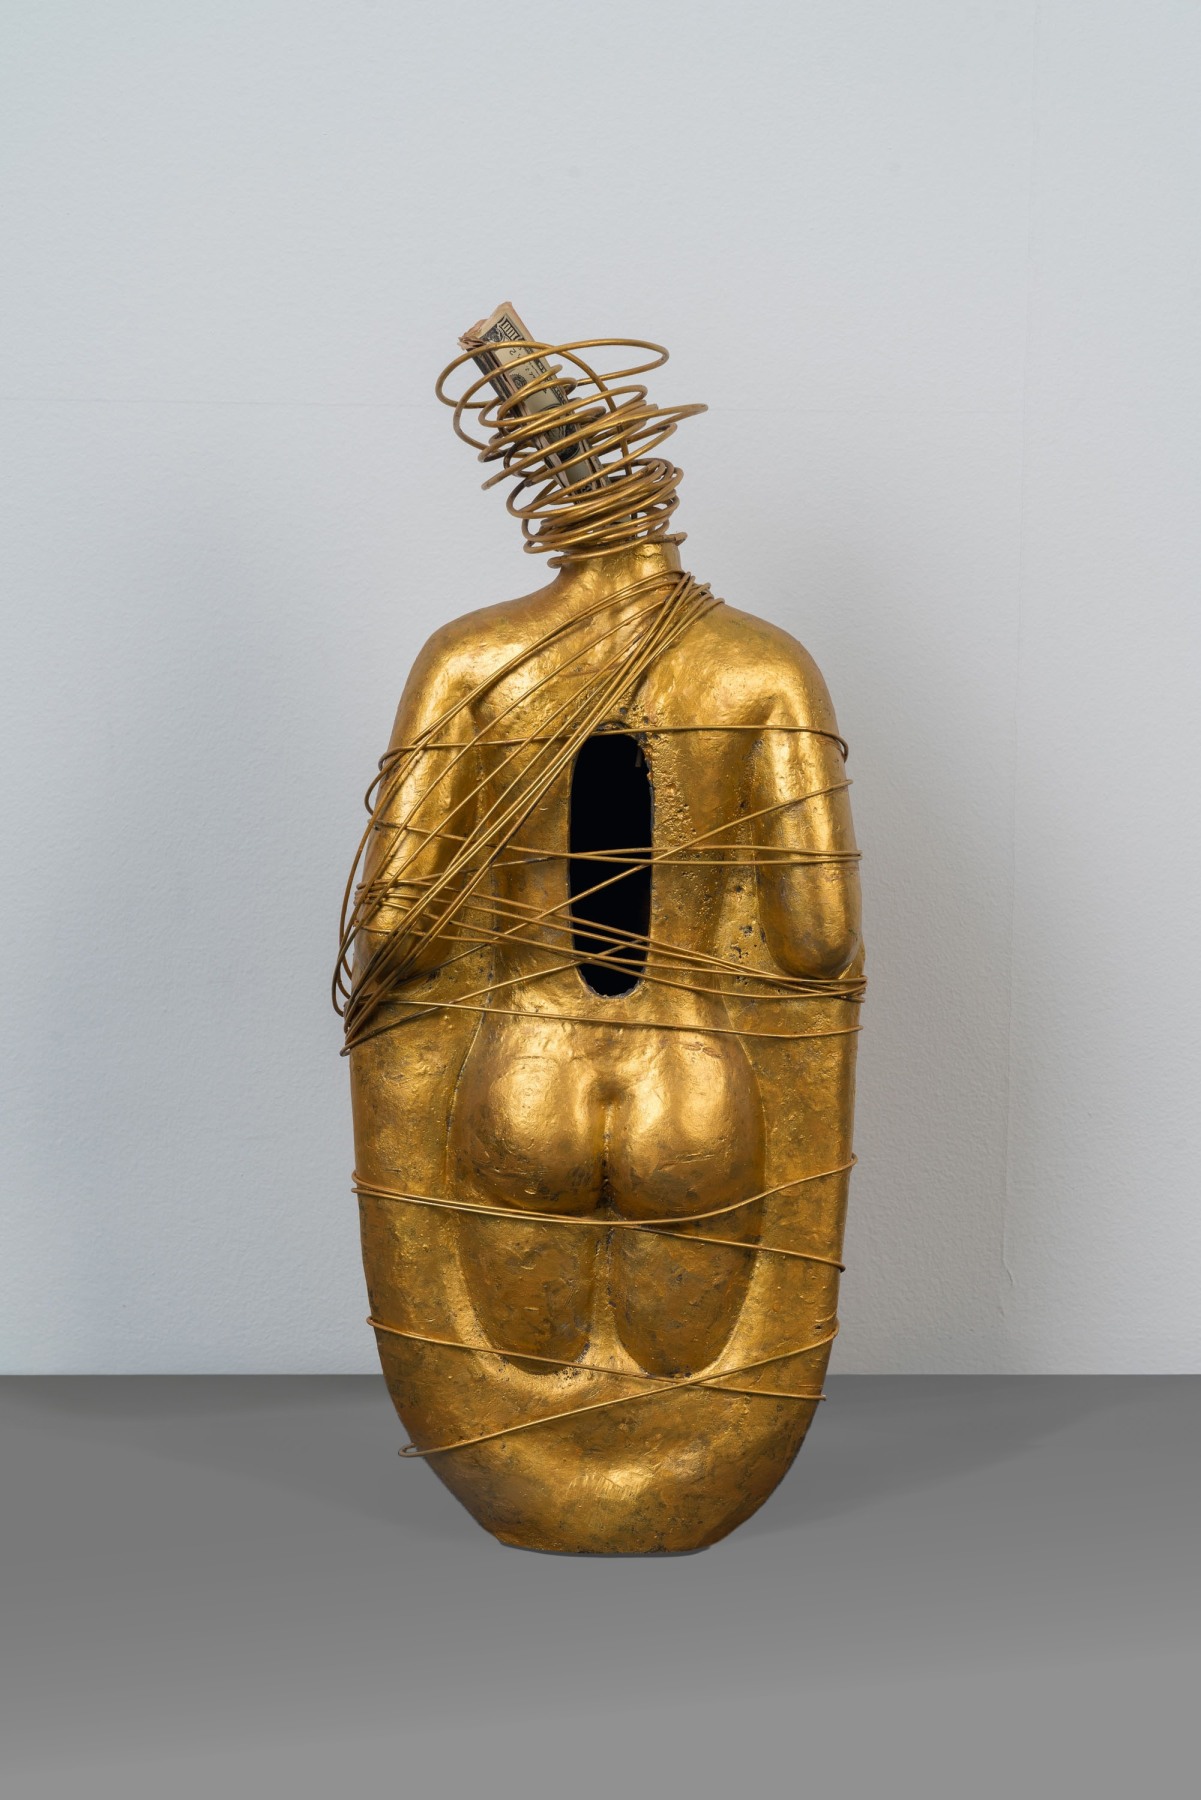 Invisible Questions That Fill the Air: James Lee Byars and Seung-Taek Lee